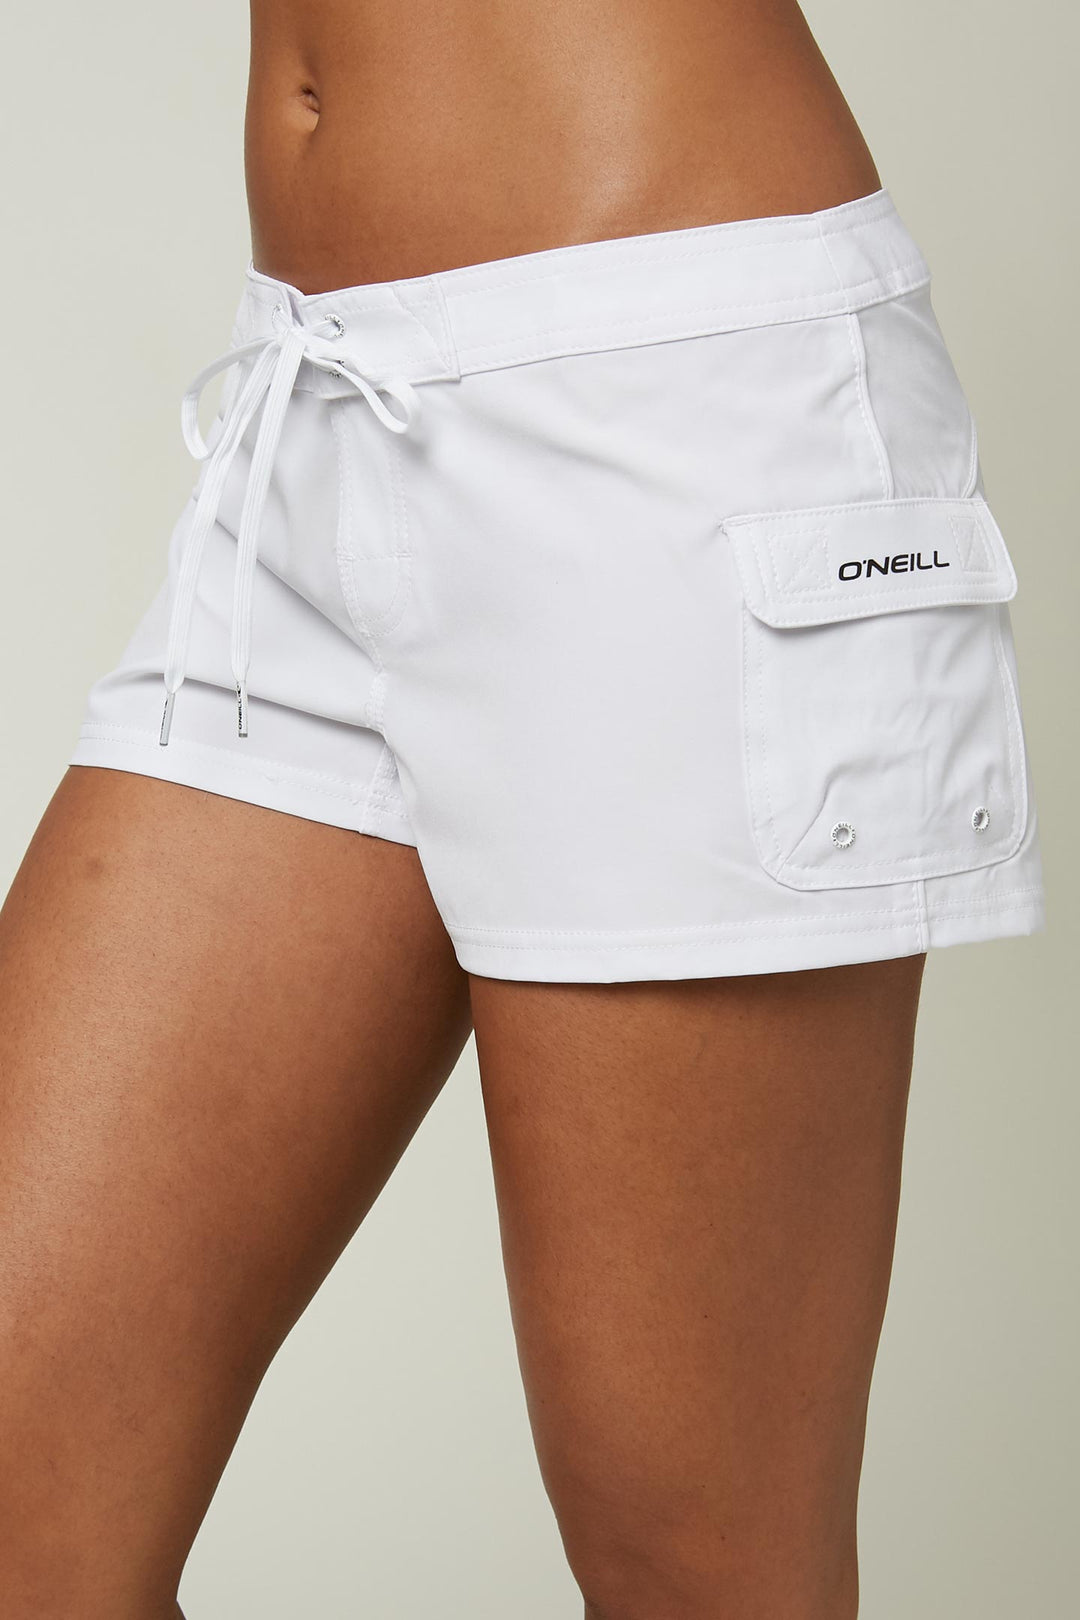 Maui Rippers Women's Shorts On Sale Up To 90% Off Retail